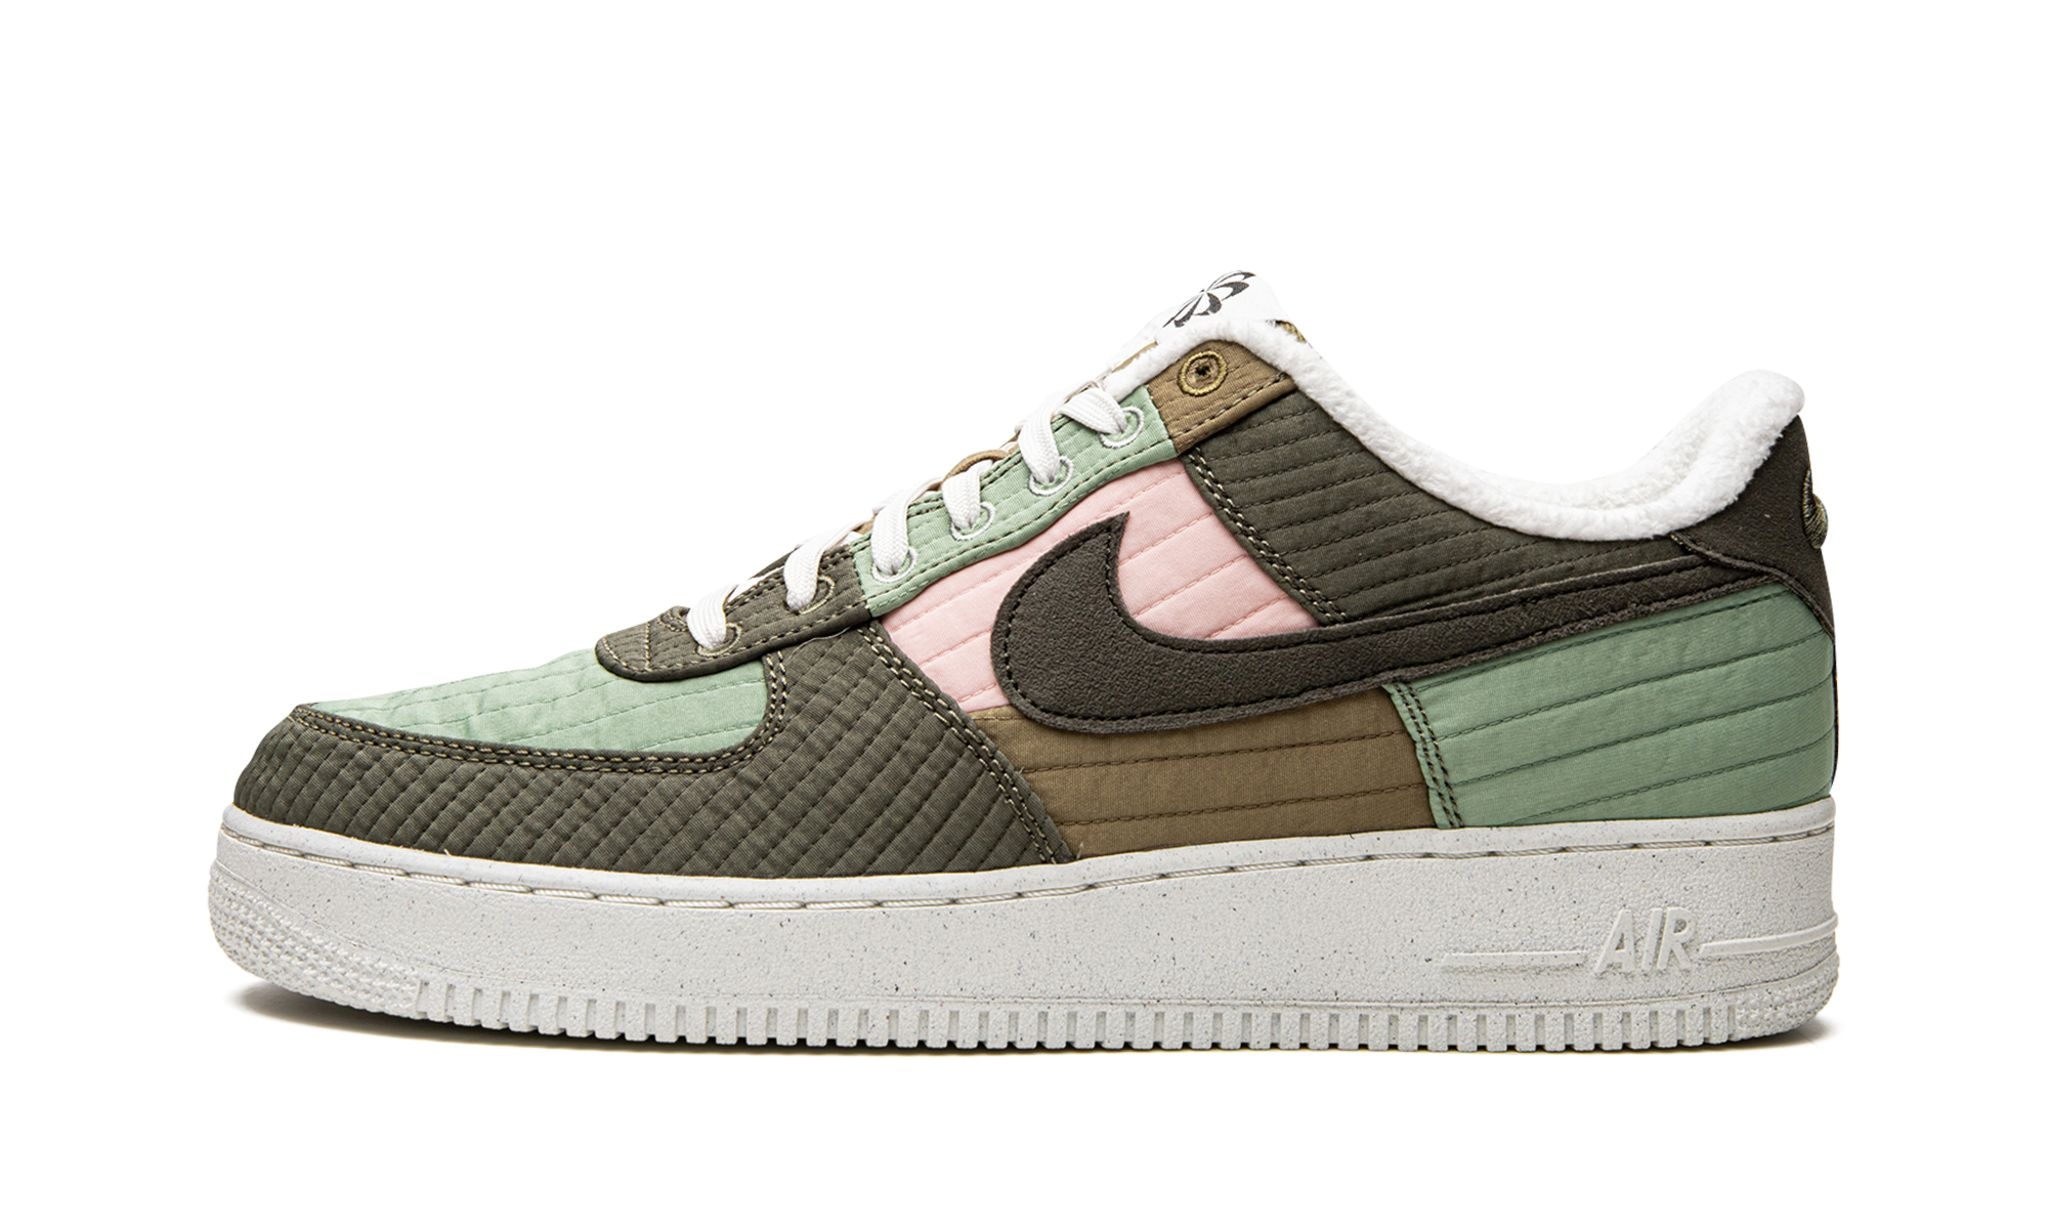 Air Force 1 Low "Toasty" - 1